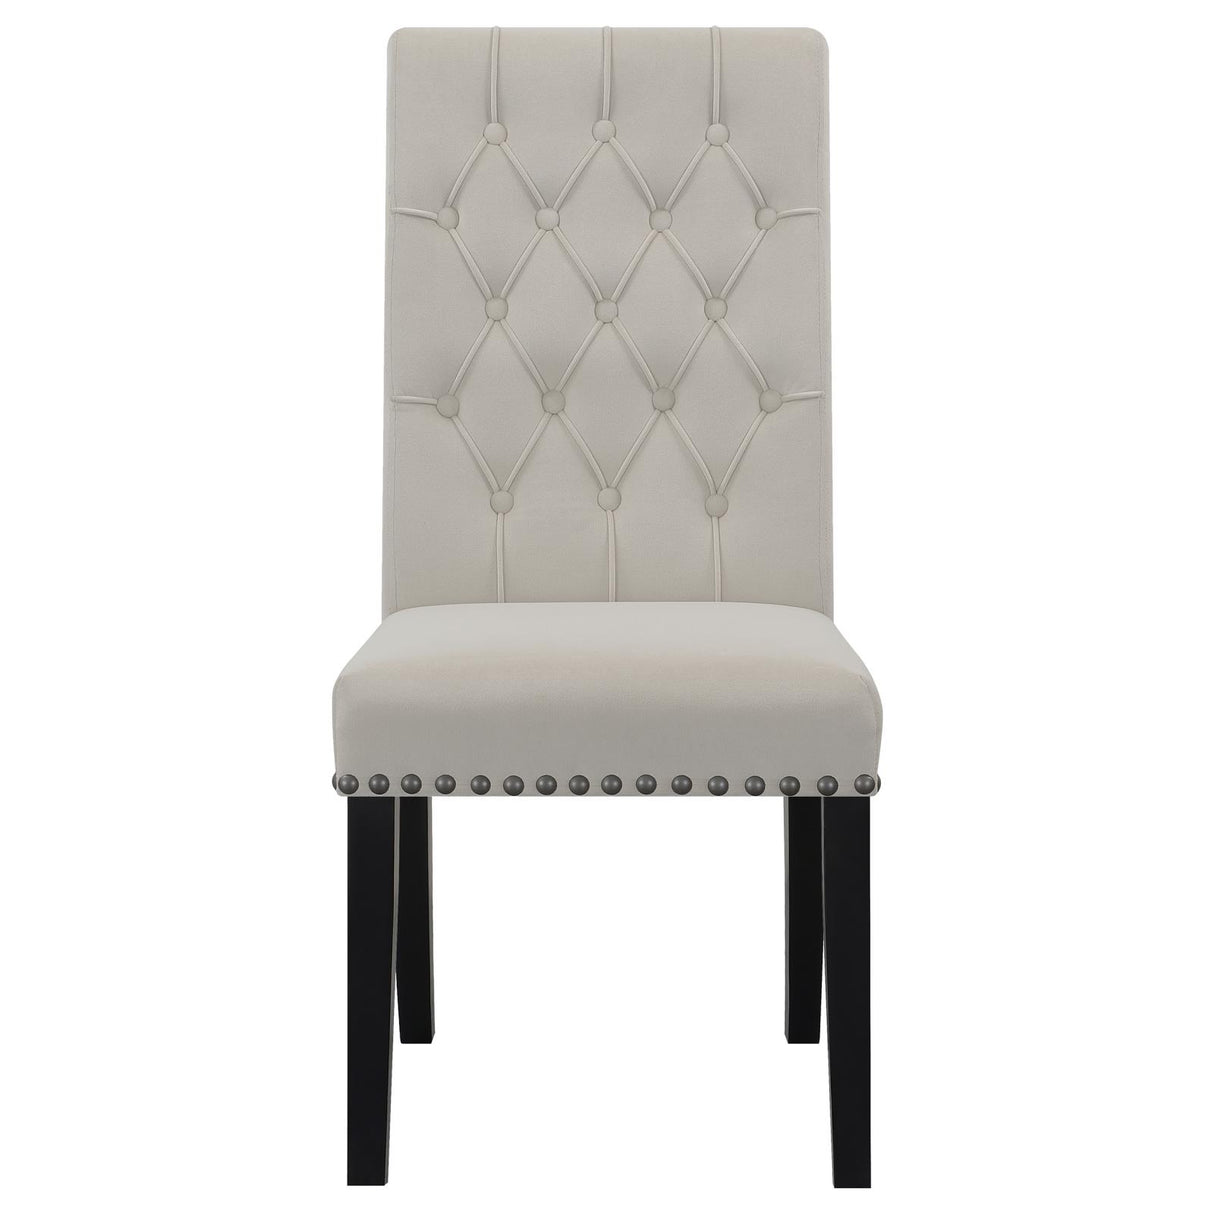 Alana Upholstered Tufted Side Chairs with Nailhead Trim (Set of 2) - 115182 - Luna Furniture